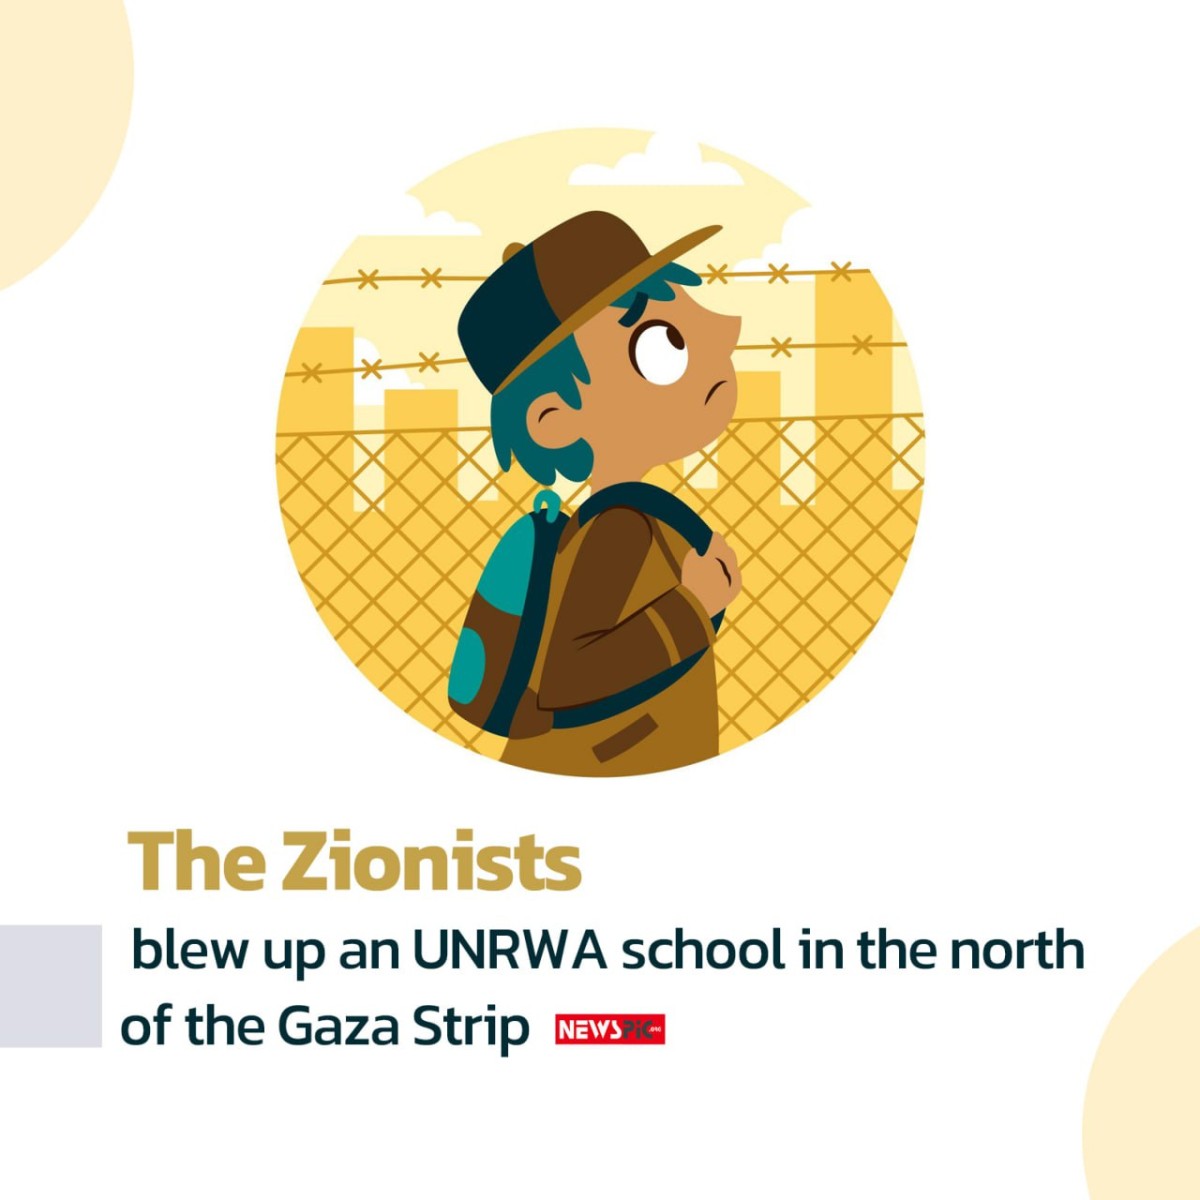 The Zionists blew up an UNRWA school in the north of the Gaza Strip